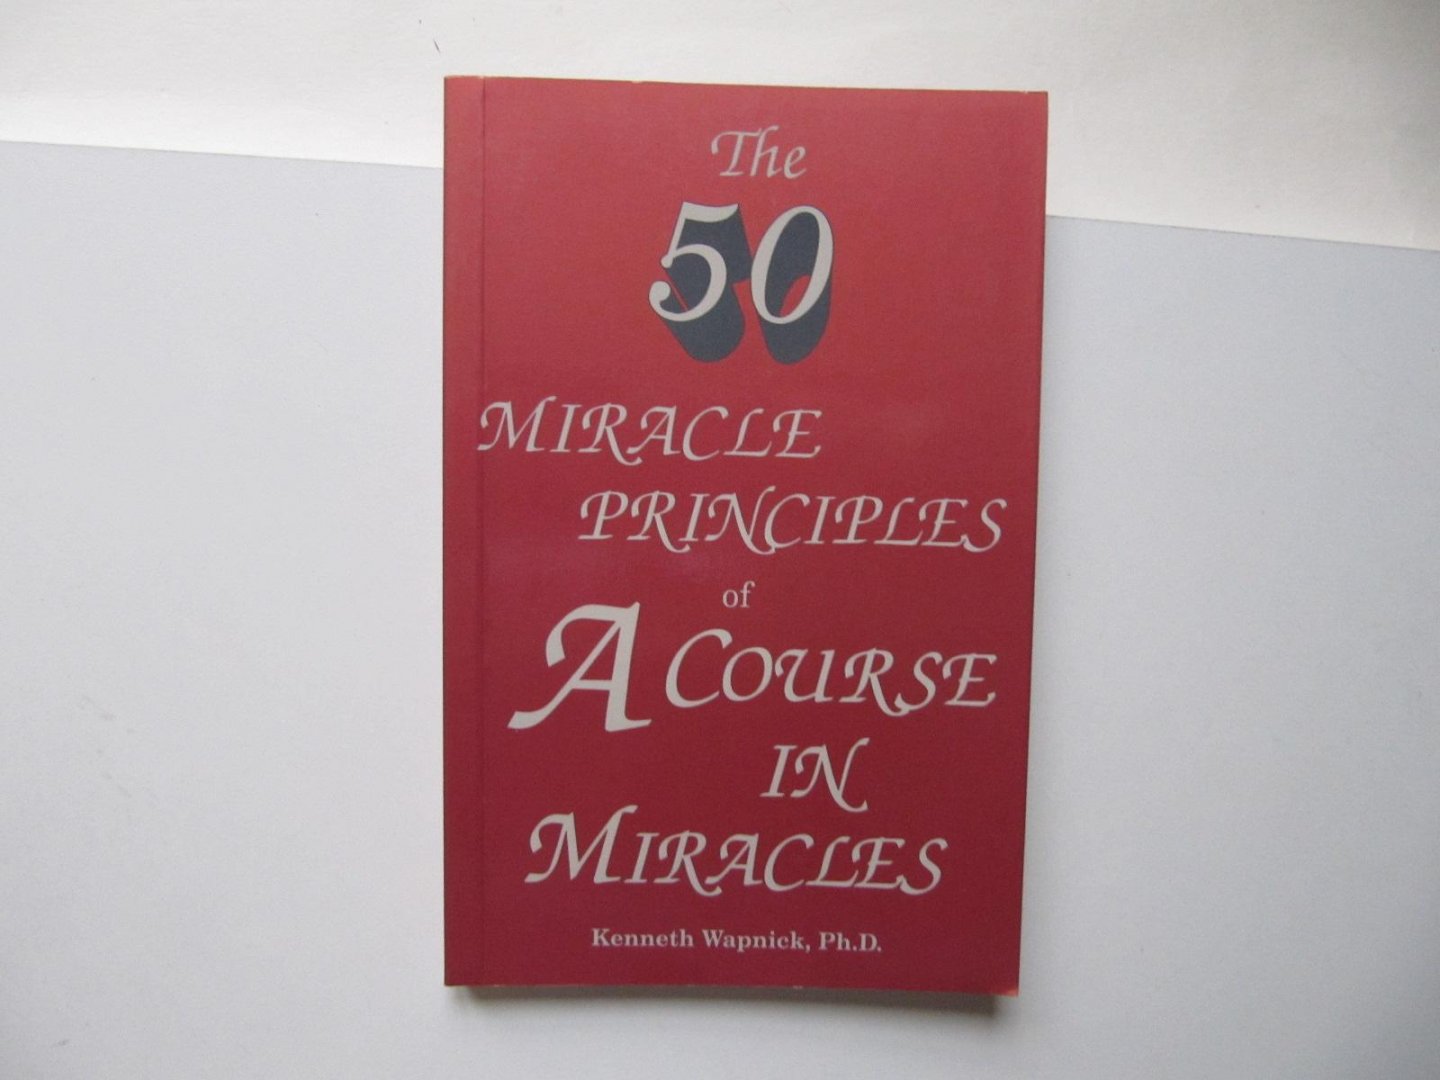 Kenneth Wapnick, Ph.D. - The 50 Miracle Principles of A Course in Miracles